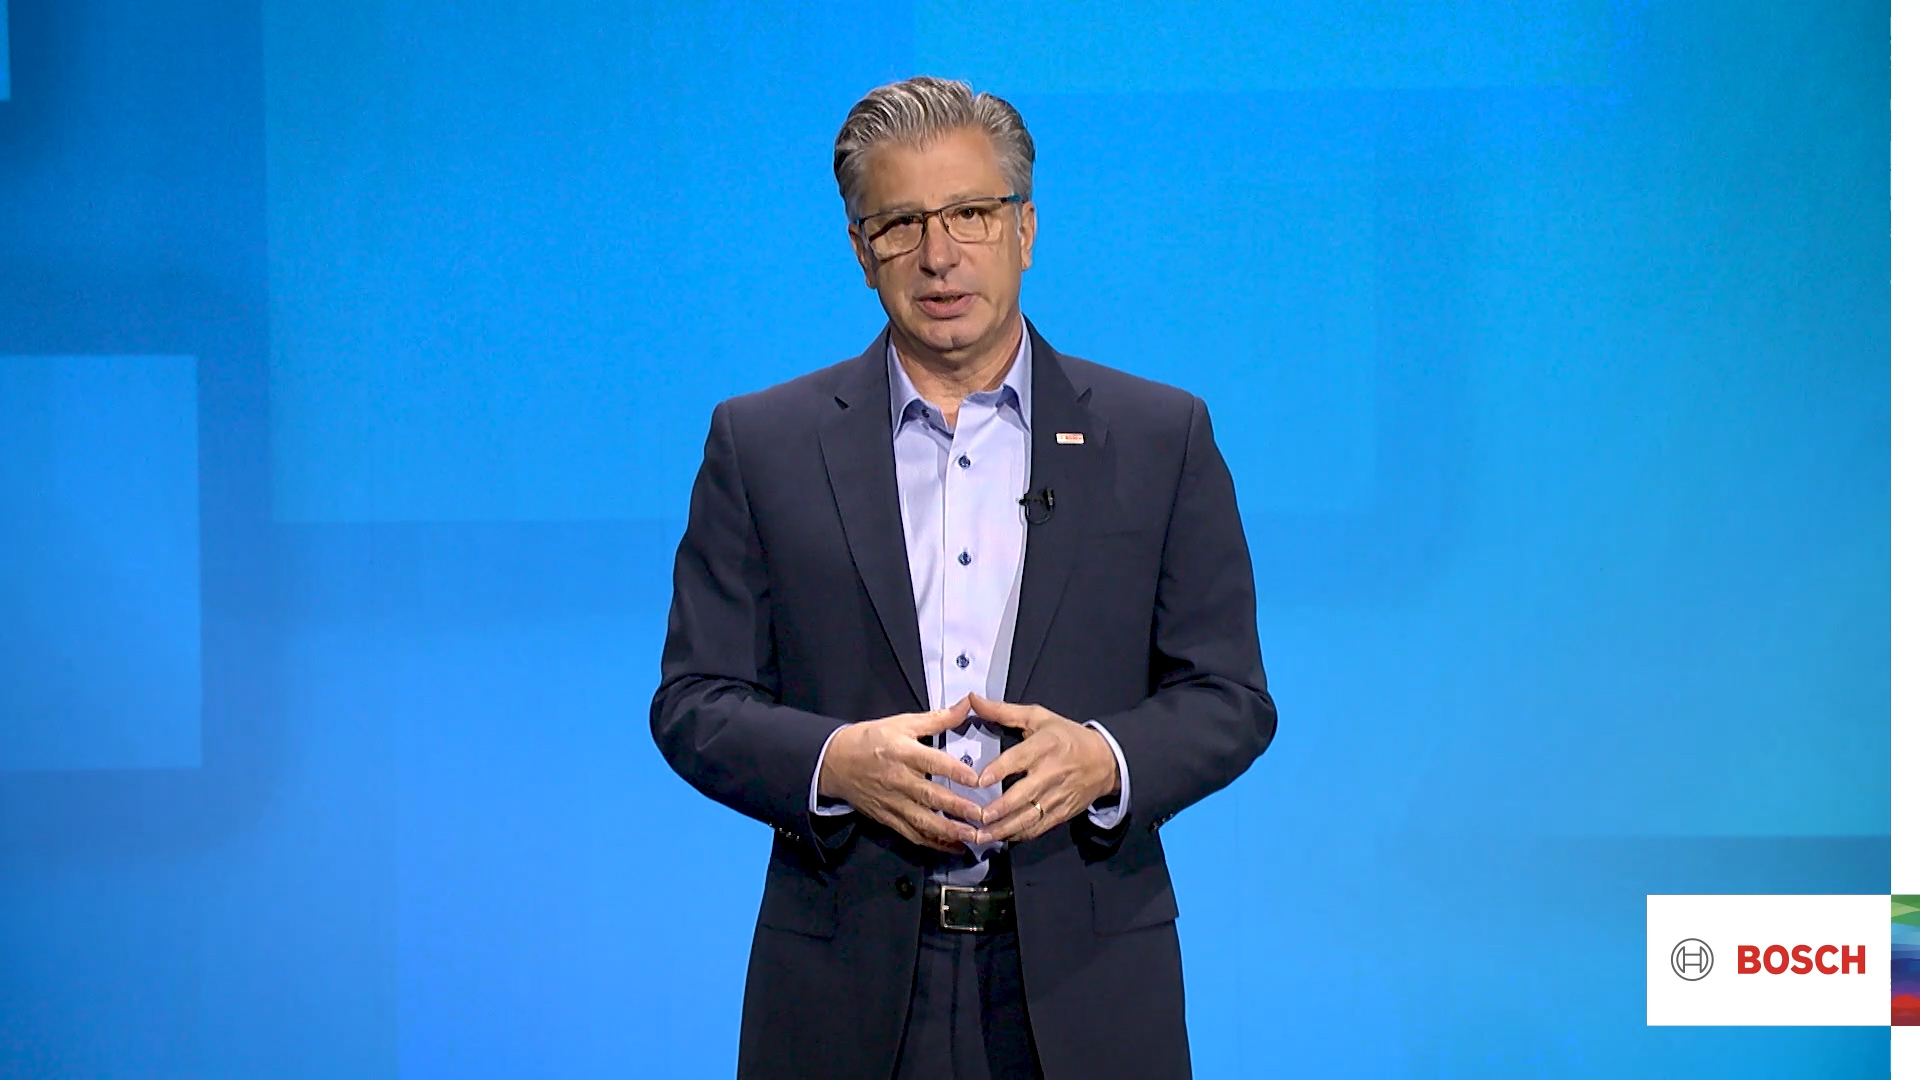 Mike Mansuetti, president of Bosch in North America, at CES 2021.